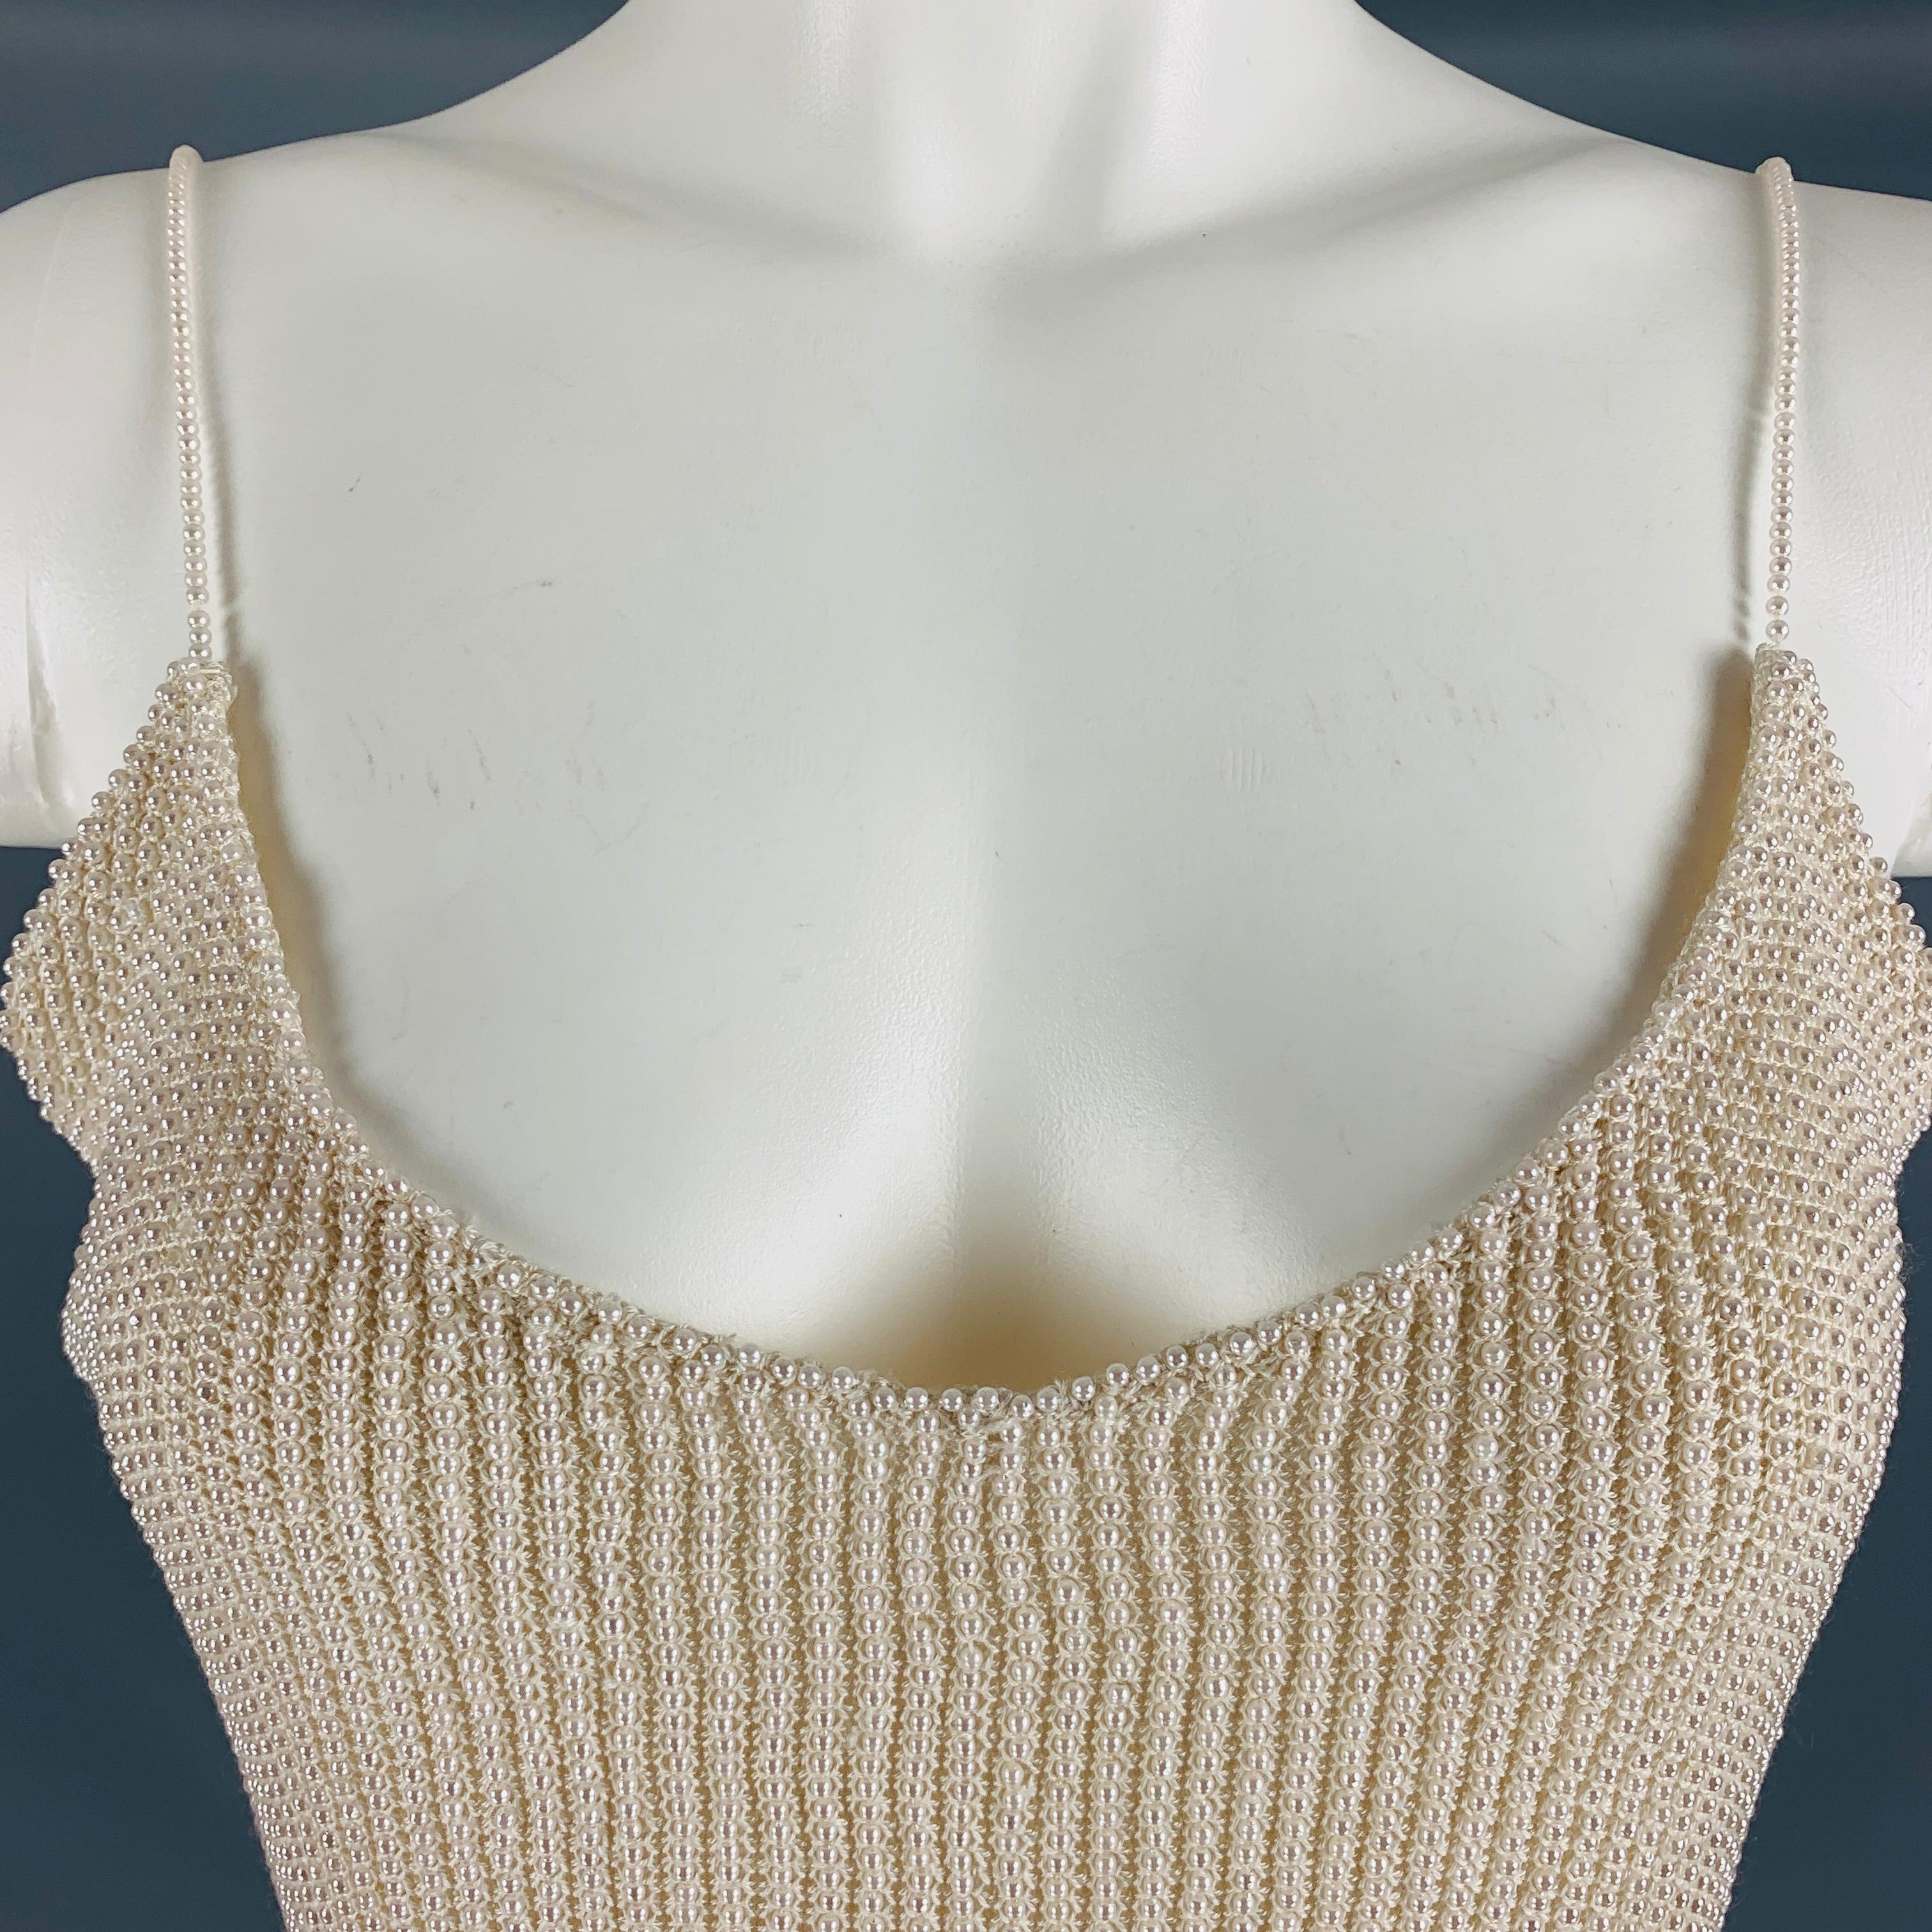 RALPH LAUREN COLLECTION by tank top comes in a beige viscose knit featuring a faux pearl beaded texture and faux pearl spaghetti straps. Excellent Pre-Owned Condition. 

Marked:   L 

Measurements: 
  Bust: 34 inches  Length: 13 inches  
  
  
